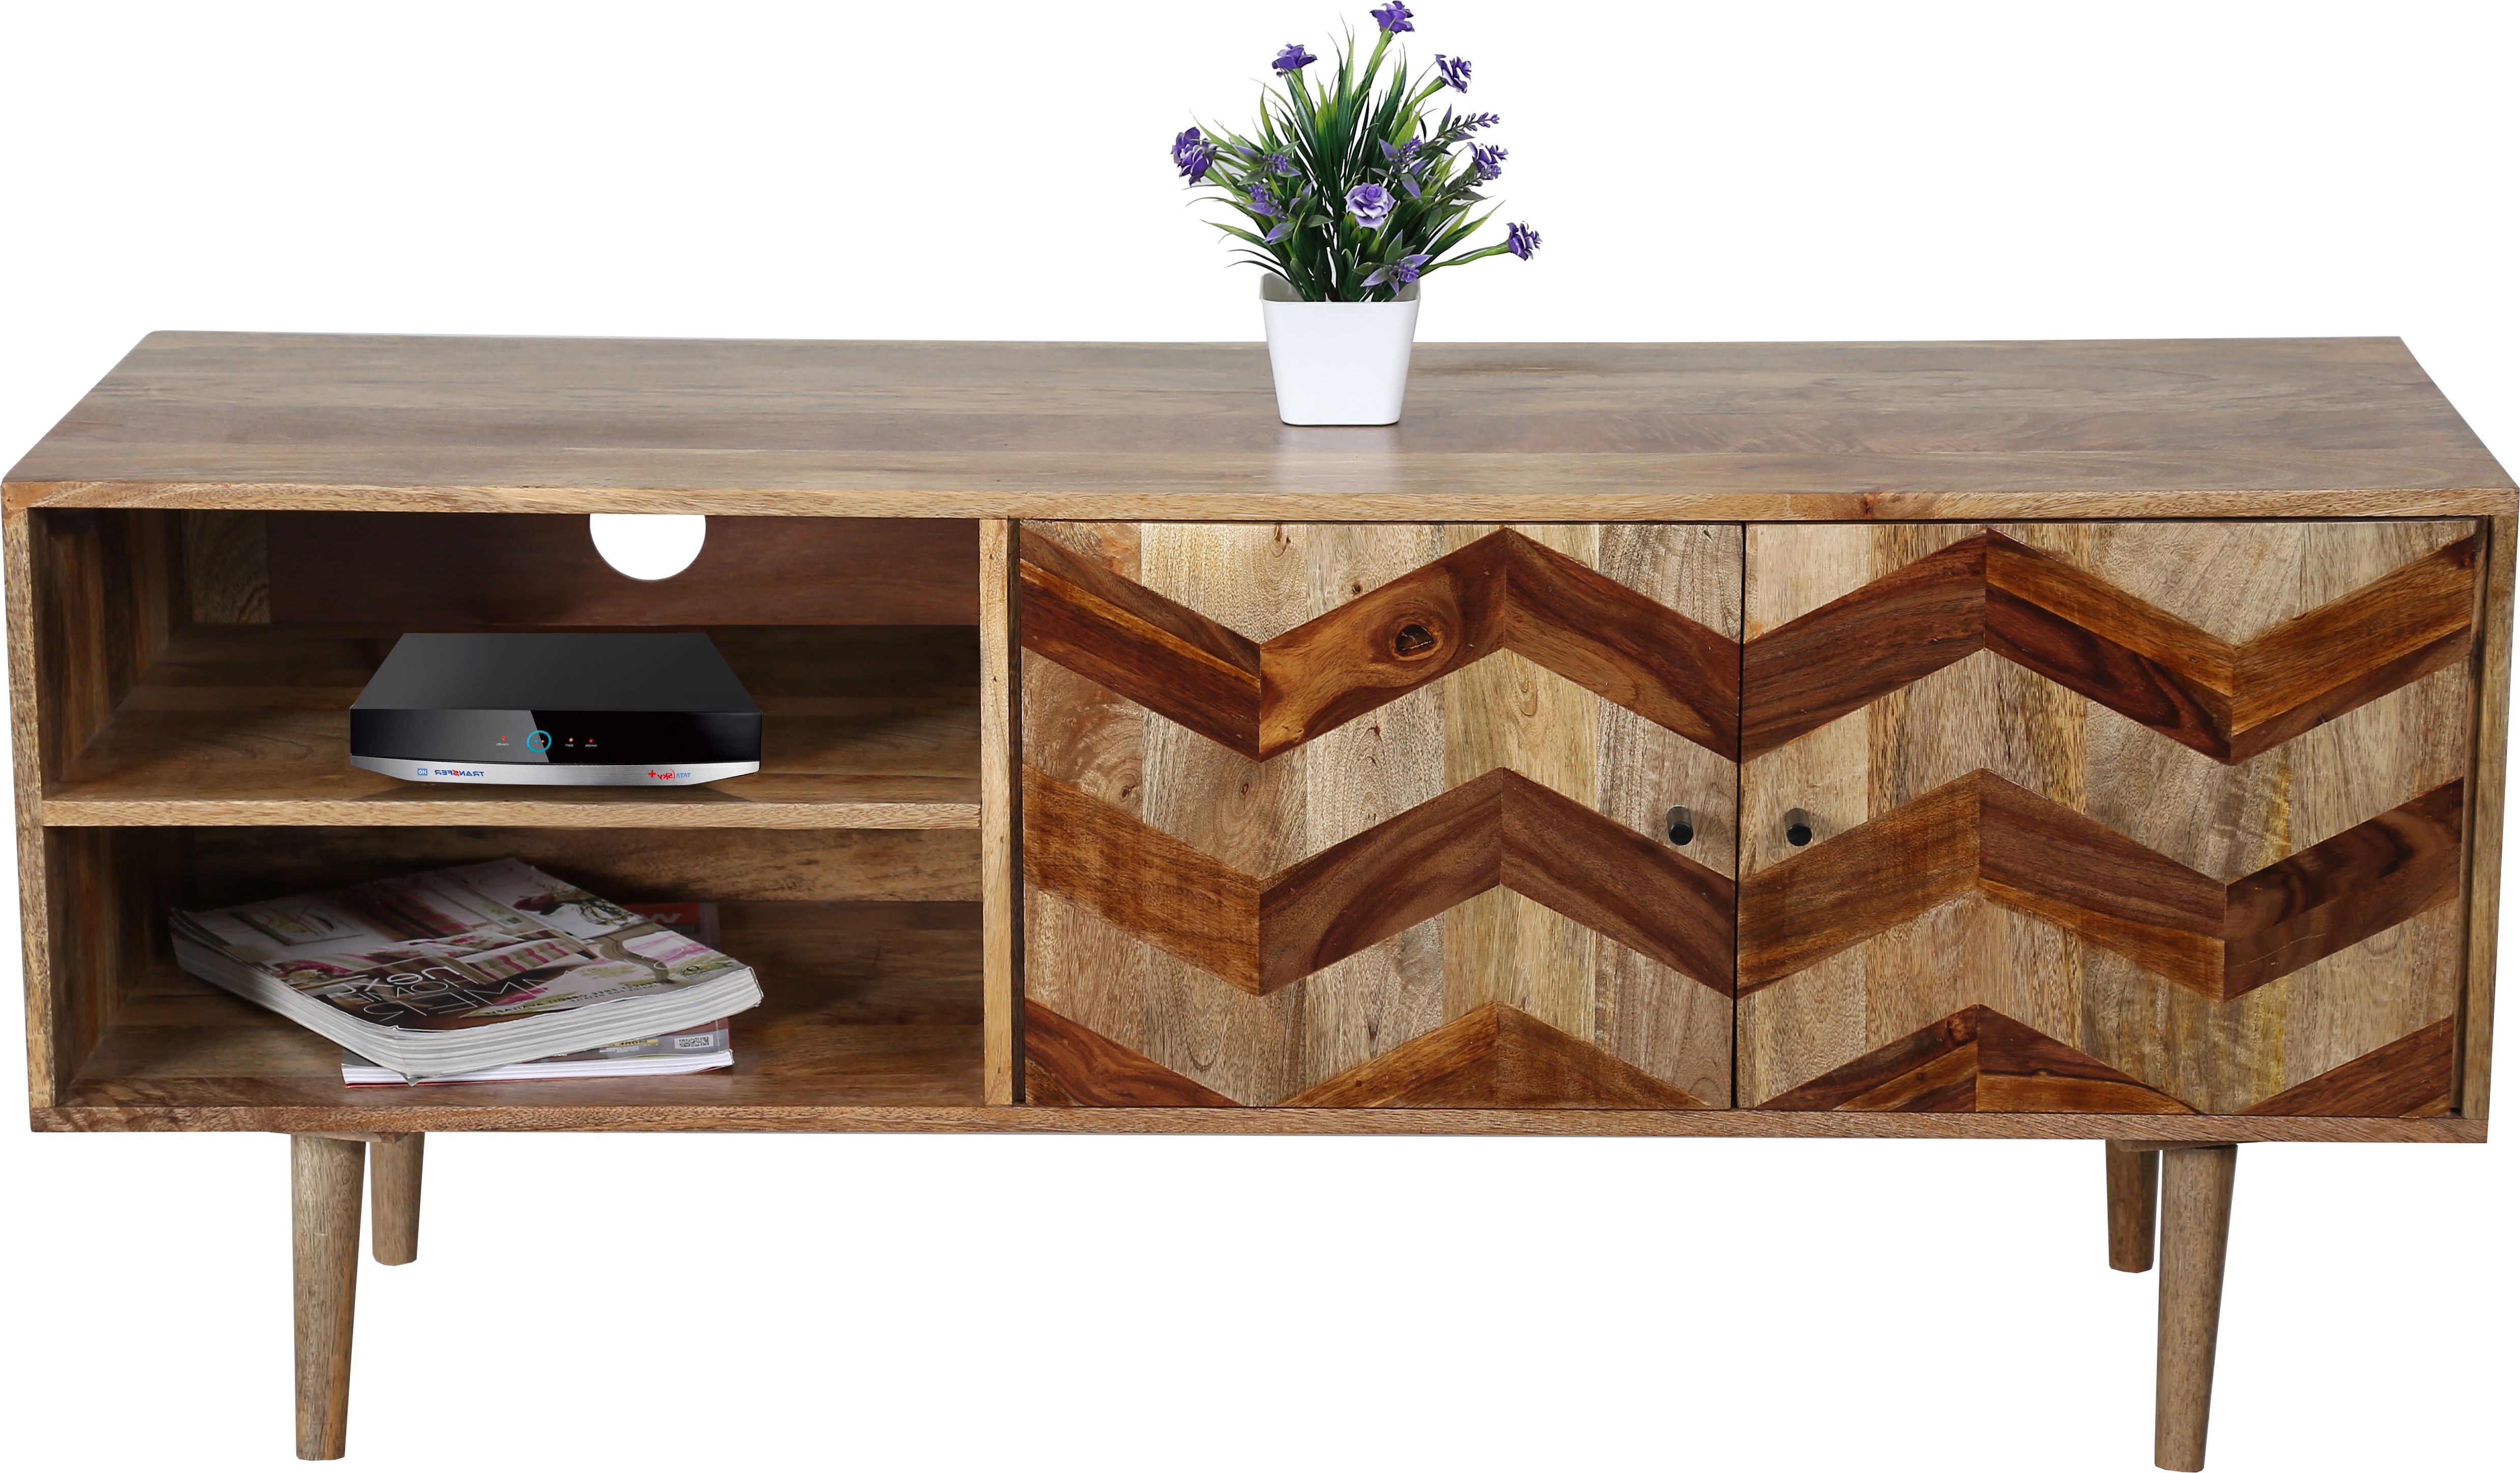 Mango Tv Units Throughout Newest Zigzag Themed Tv Cabinet In Light Mango Wood With Wooden Legs (View 3 of 20)